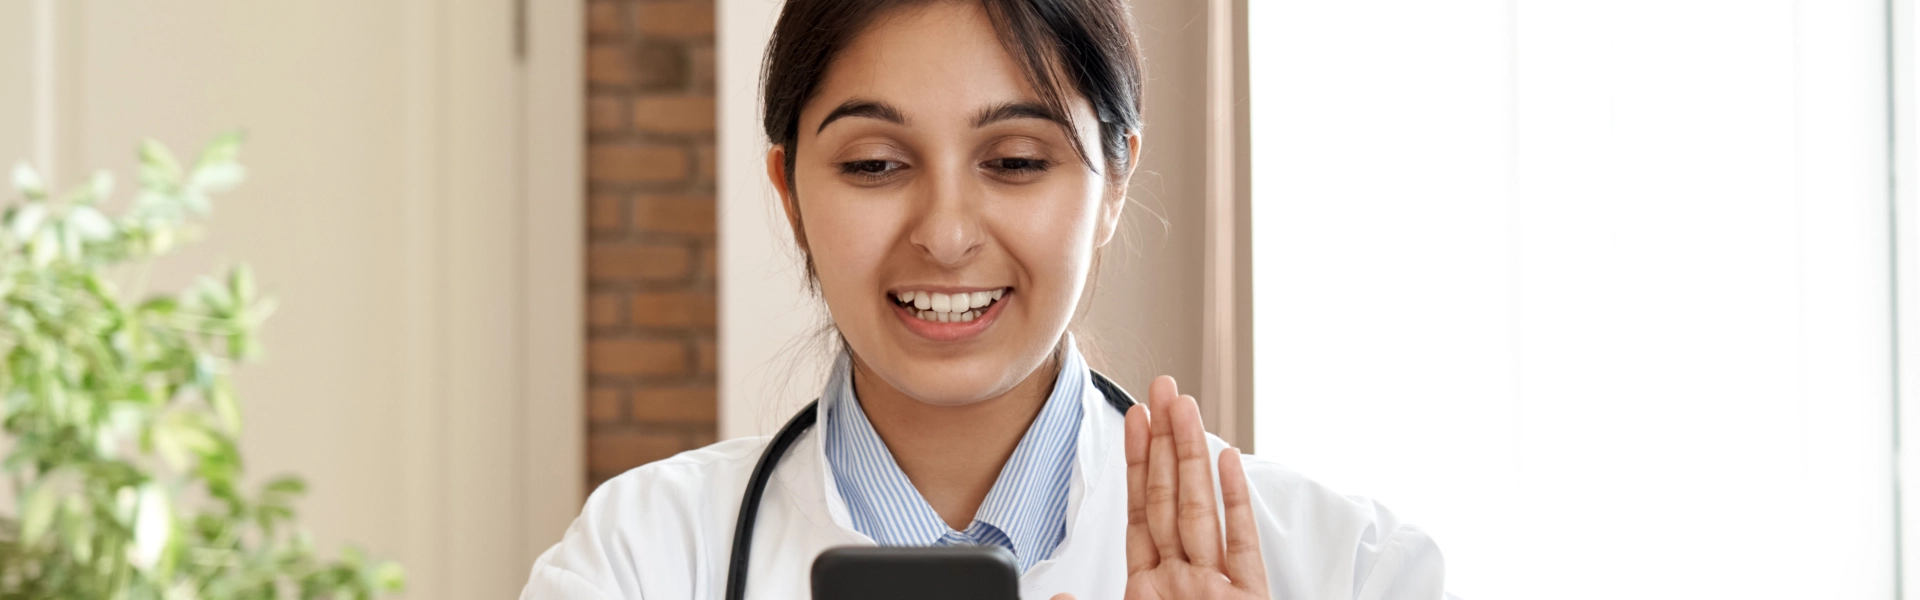 doctor talking to her patient on phone